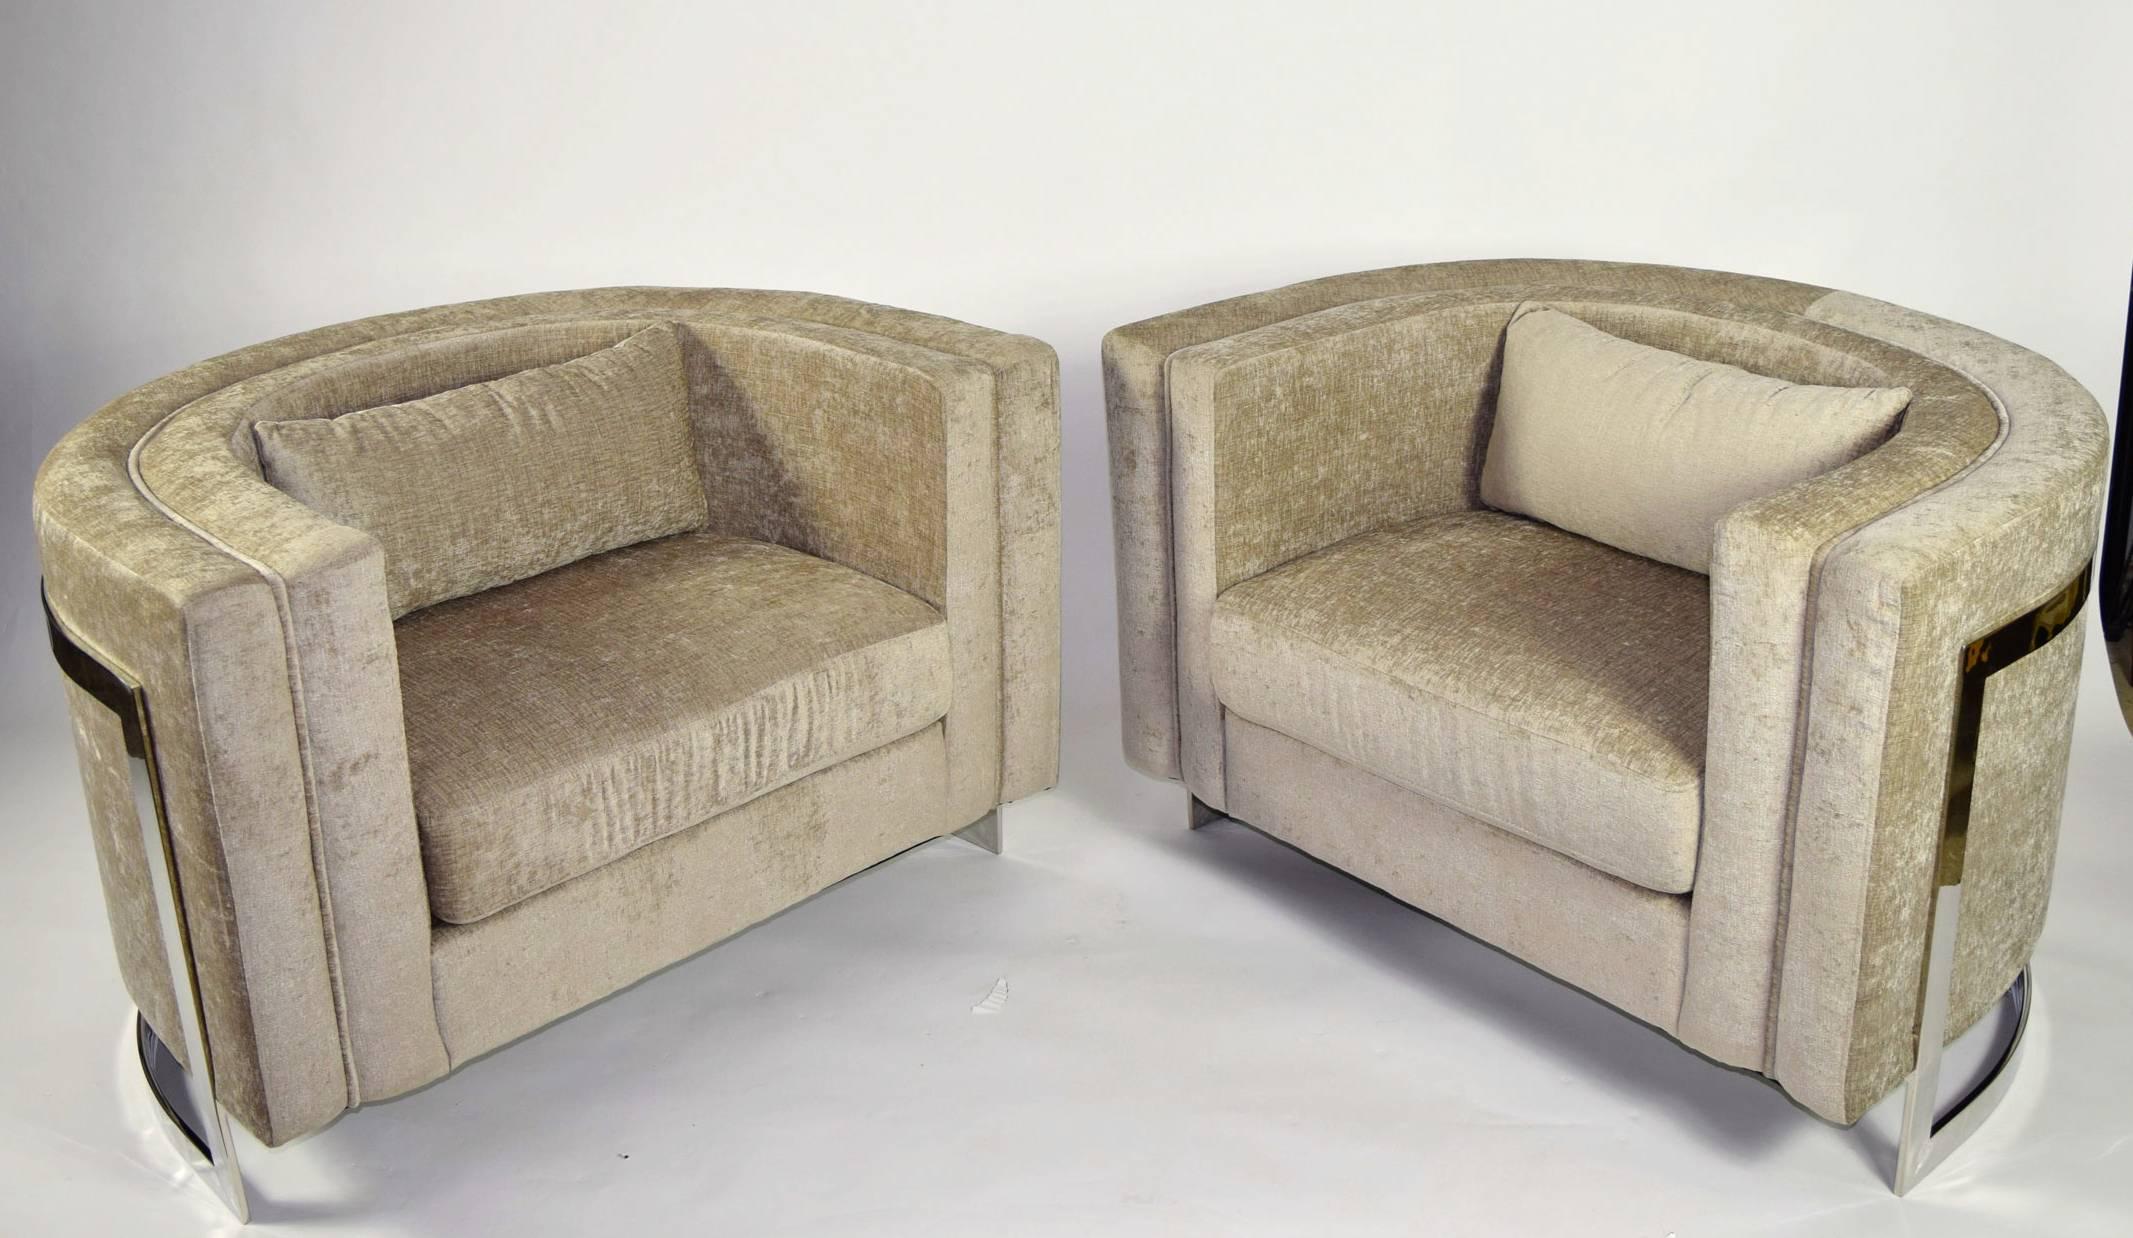 Chrome frame half-moon shaped, large Milo Baughman lounge chairs. In oatmeal colored upholstery.